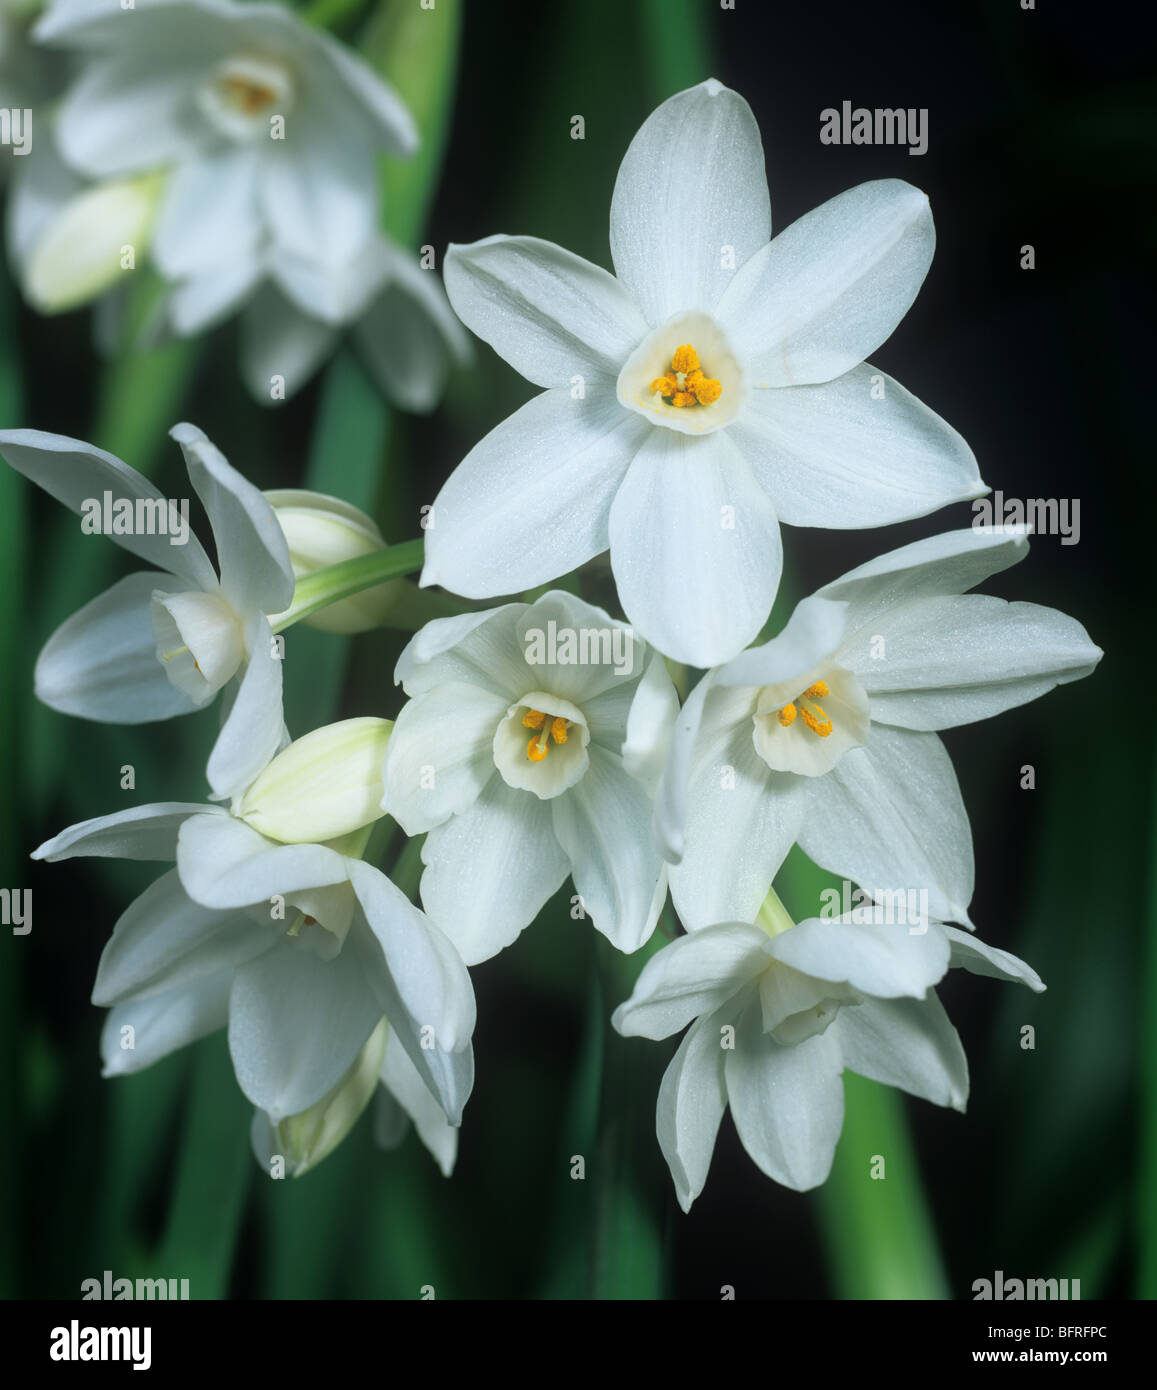 Daffodil Narcissus 'Paper White' flowers Stock Photo